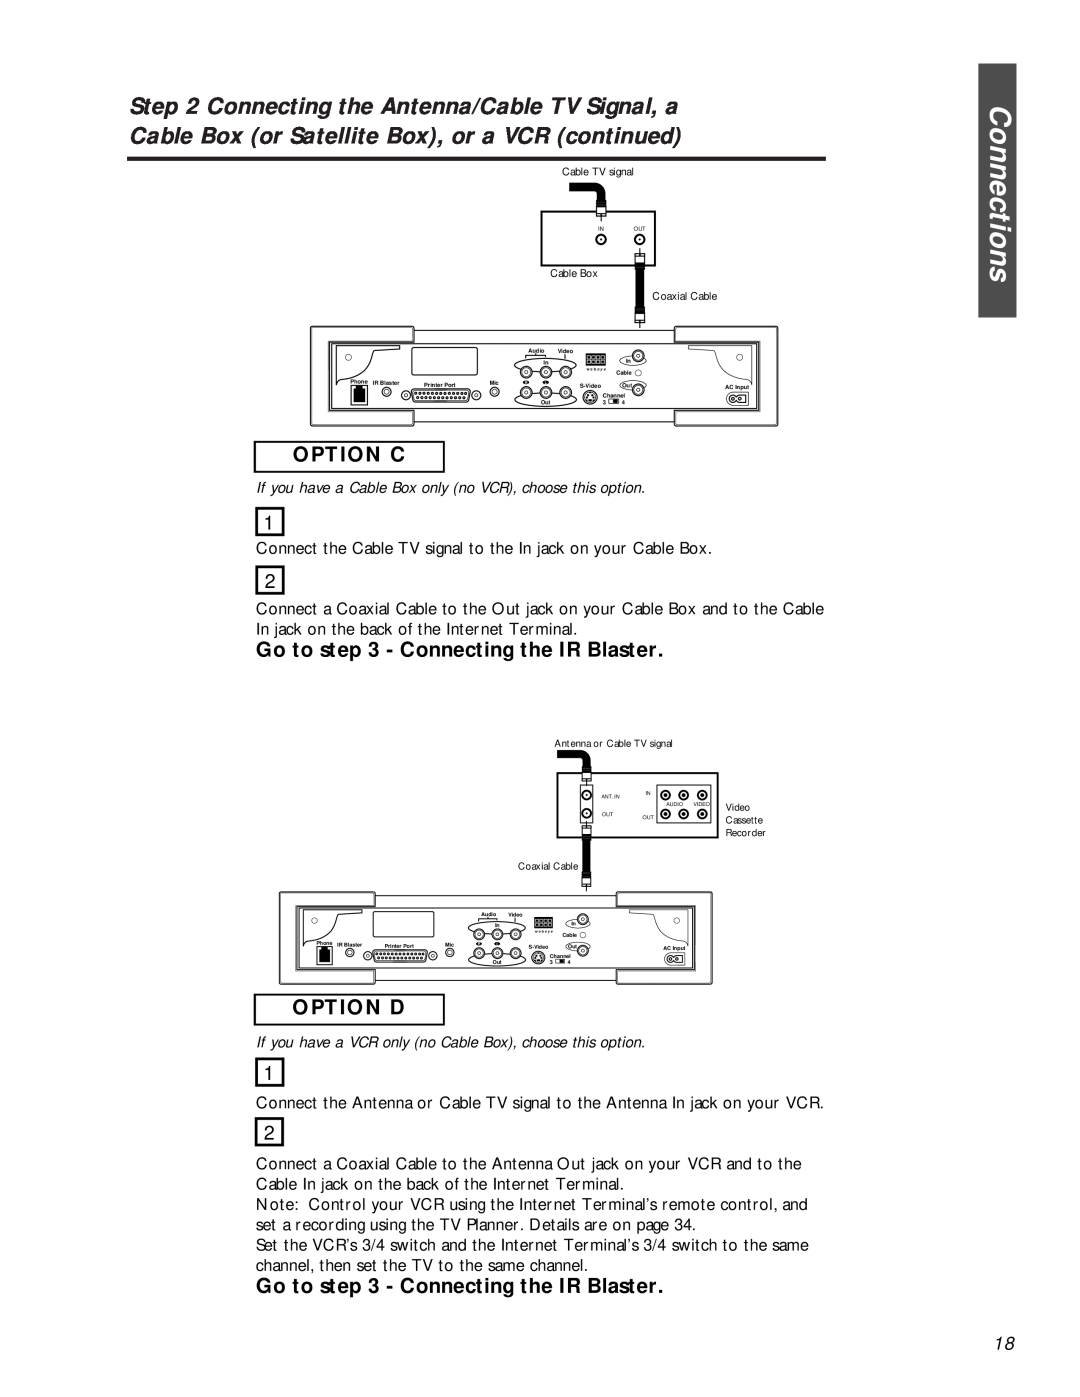 Philips MAT972KB QUG owner manual Go to - Connecting the IR Blaster, Option D, Connections, Option C 